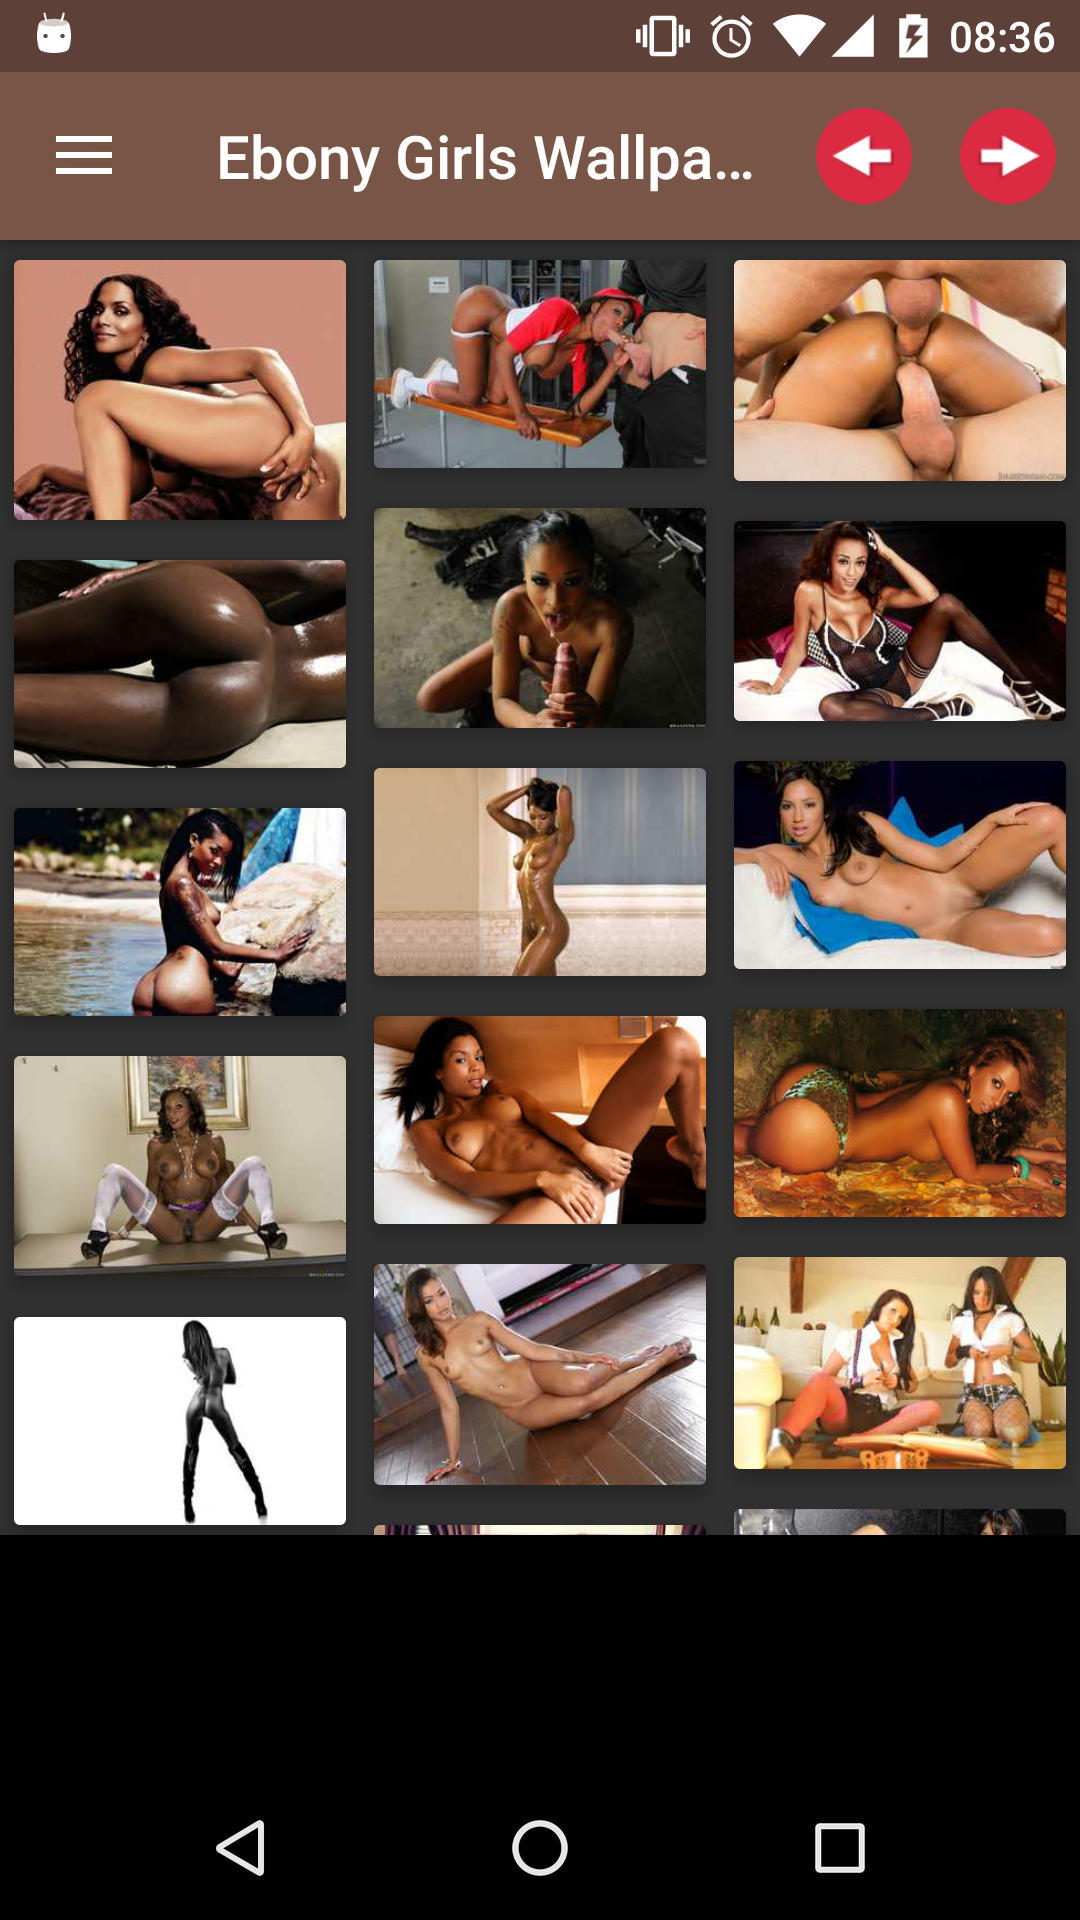 Ebony Girls Wallpapers image,henti,ebony,apk,wallpapers,hentai,apps,images,pics,picturd,best,for,picx,android,pornstars,sexy,henta,list,app,black,gallery,kristinf